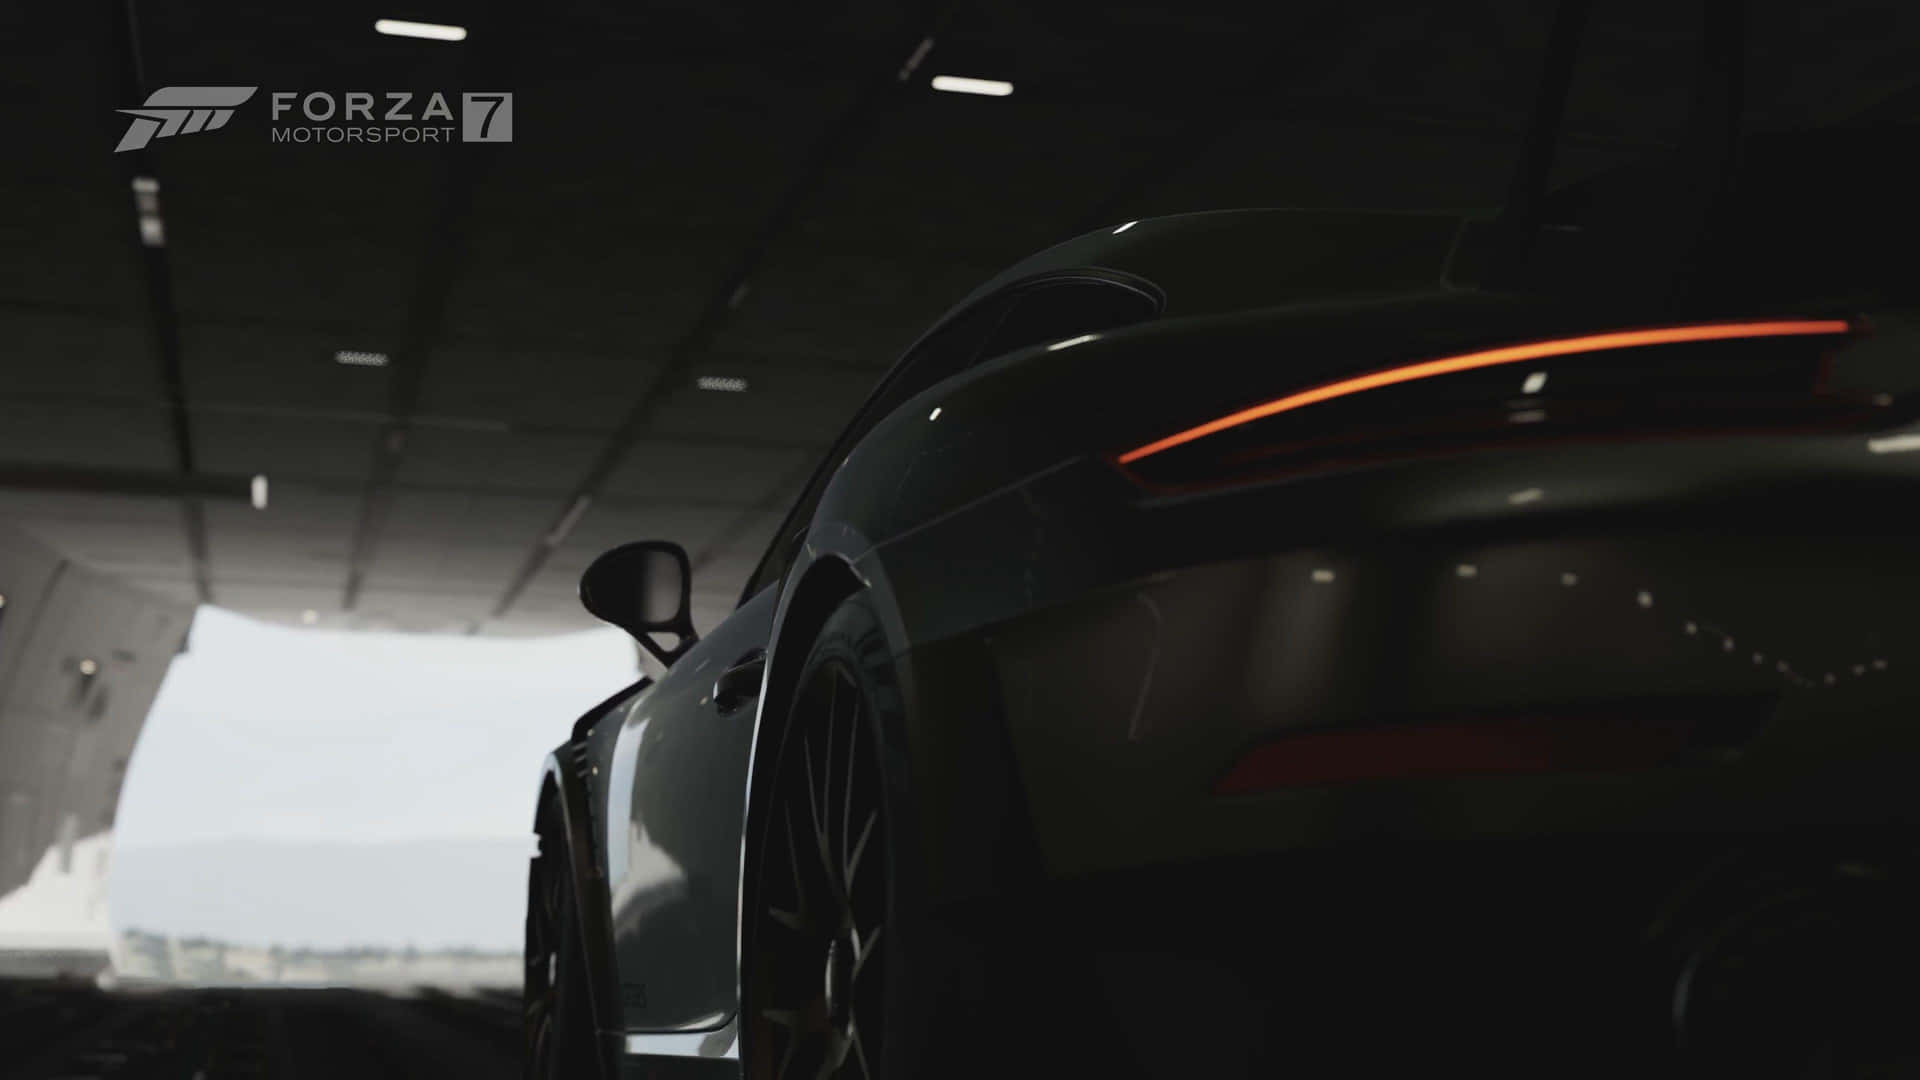 Experience a world of automotive excellence in Forza Motorsport 7